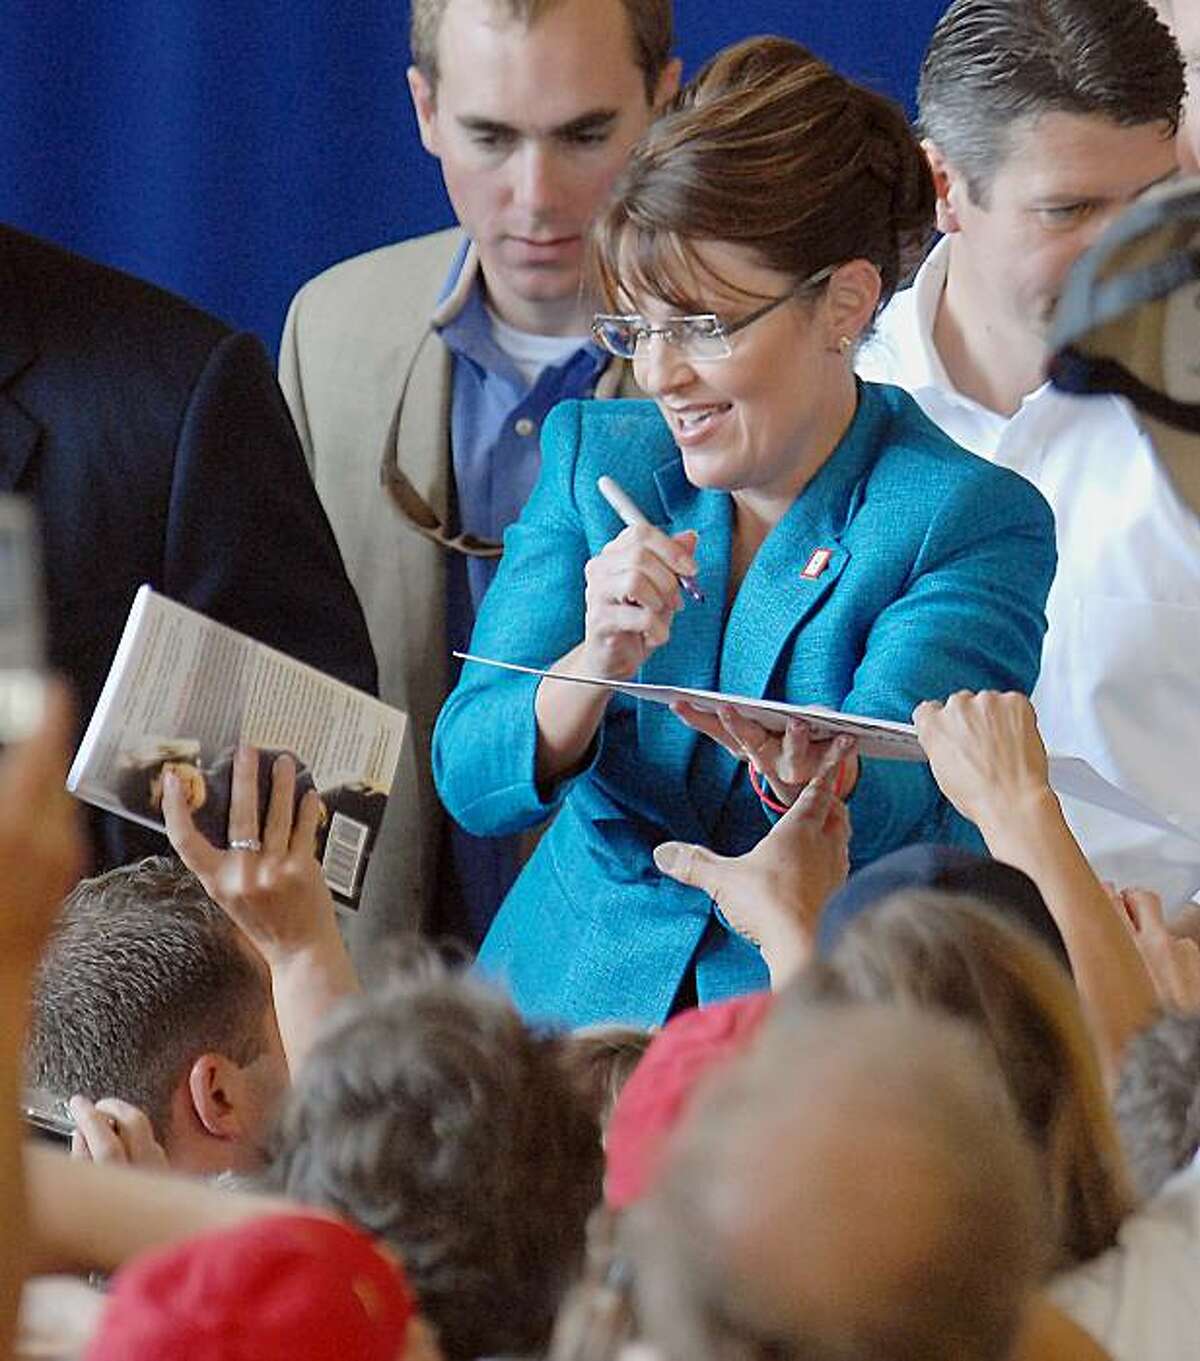 Republican vice presidential candidate, Alaska Gov. Sarah Palin, signs autographs, Friday, Sept. 19,2008, during a rally at the Anoka County Airport in Blaine, Minn. (AP Photo/Janet Hostetter)